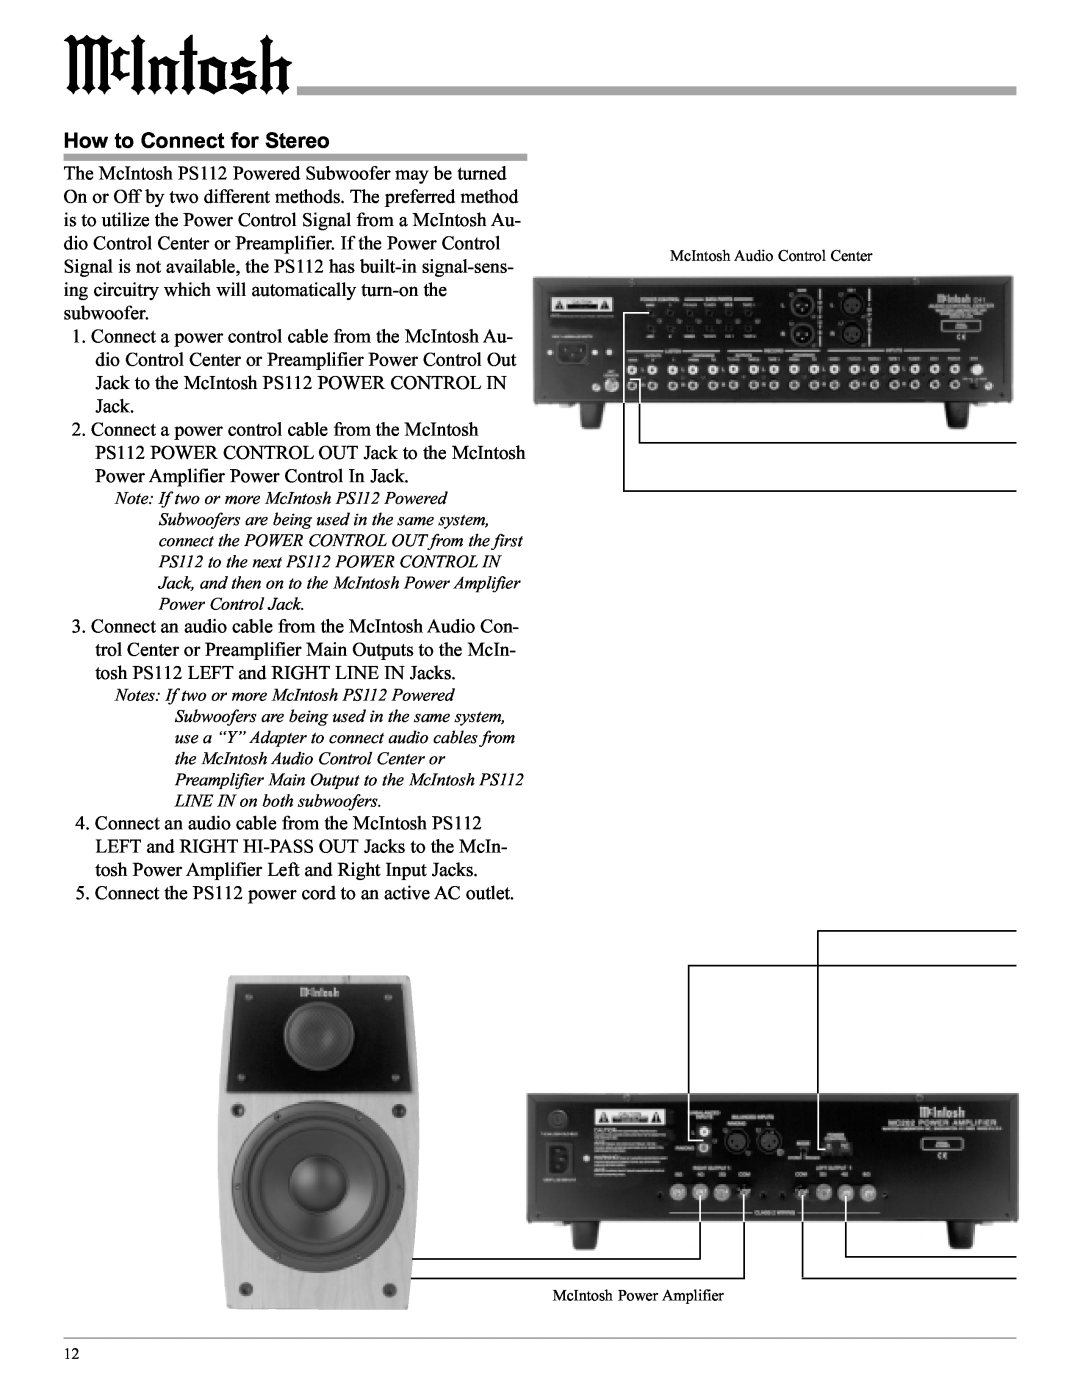 McIntosh PS112 manual How to Connect for Stereo, McIntosh Audio Control Center, McIntosh Power Amplifier 